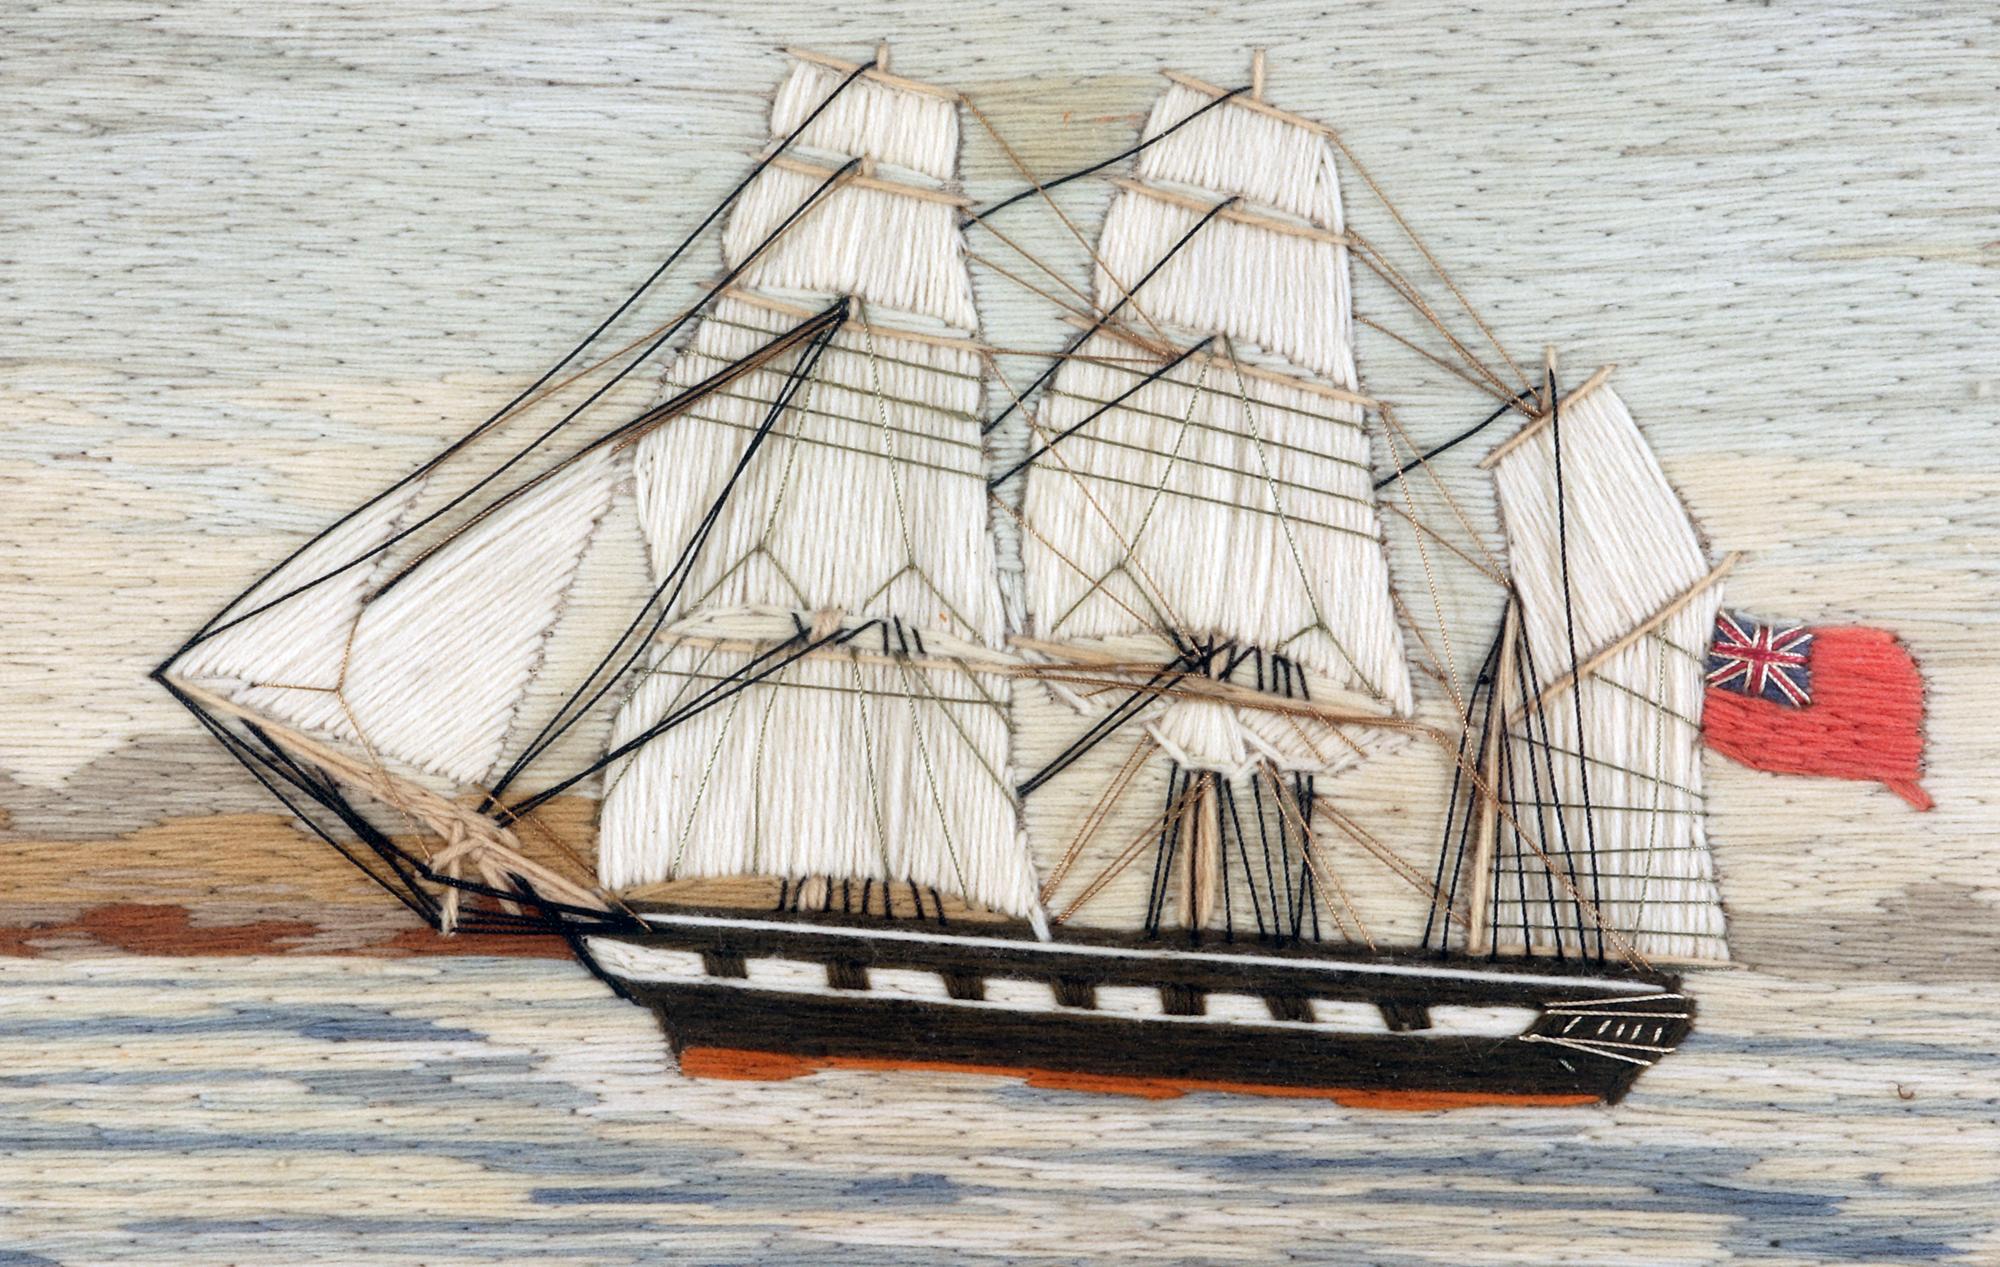 British Sailor's Woolwork of a Royal Navy Ship
circa 1765

The sailor's woolwork depicts a port side view of a three-masted British Royal Navy ship sailing on a blue sea with a lot of white heads. The ship is coming into land which can be seen to